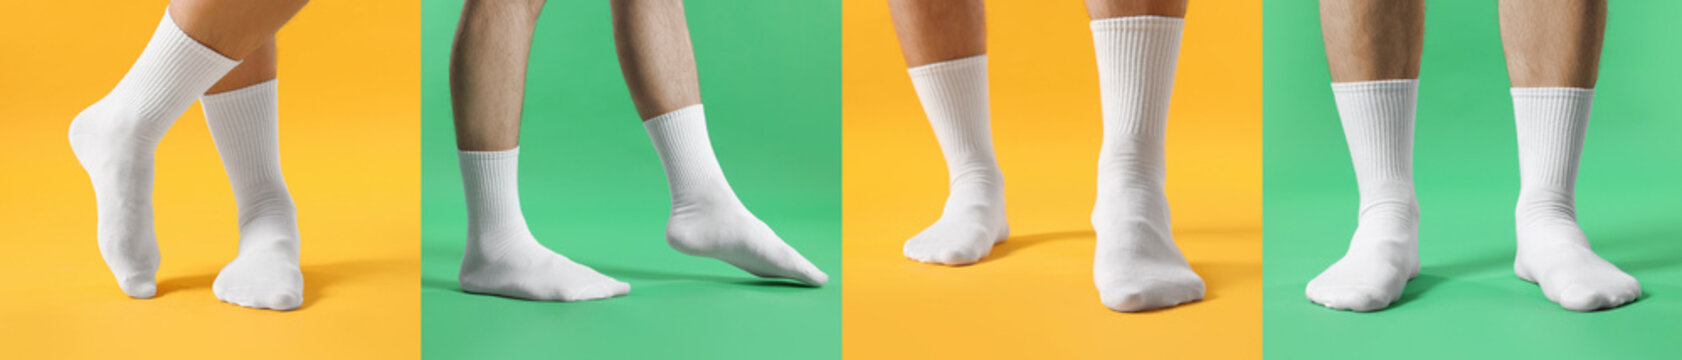 Men in stylish white socks on color backgrounds, collection of photos